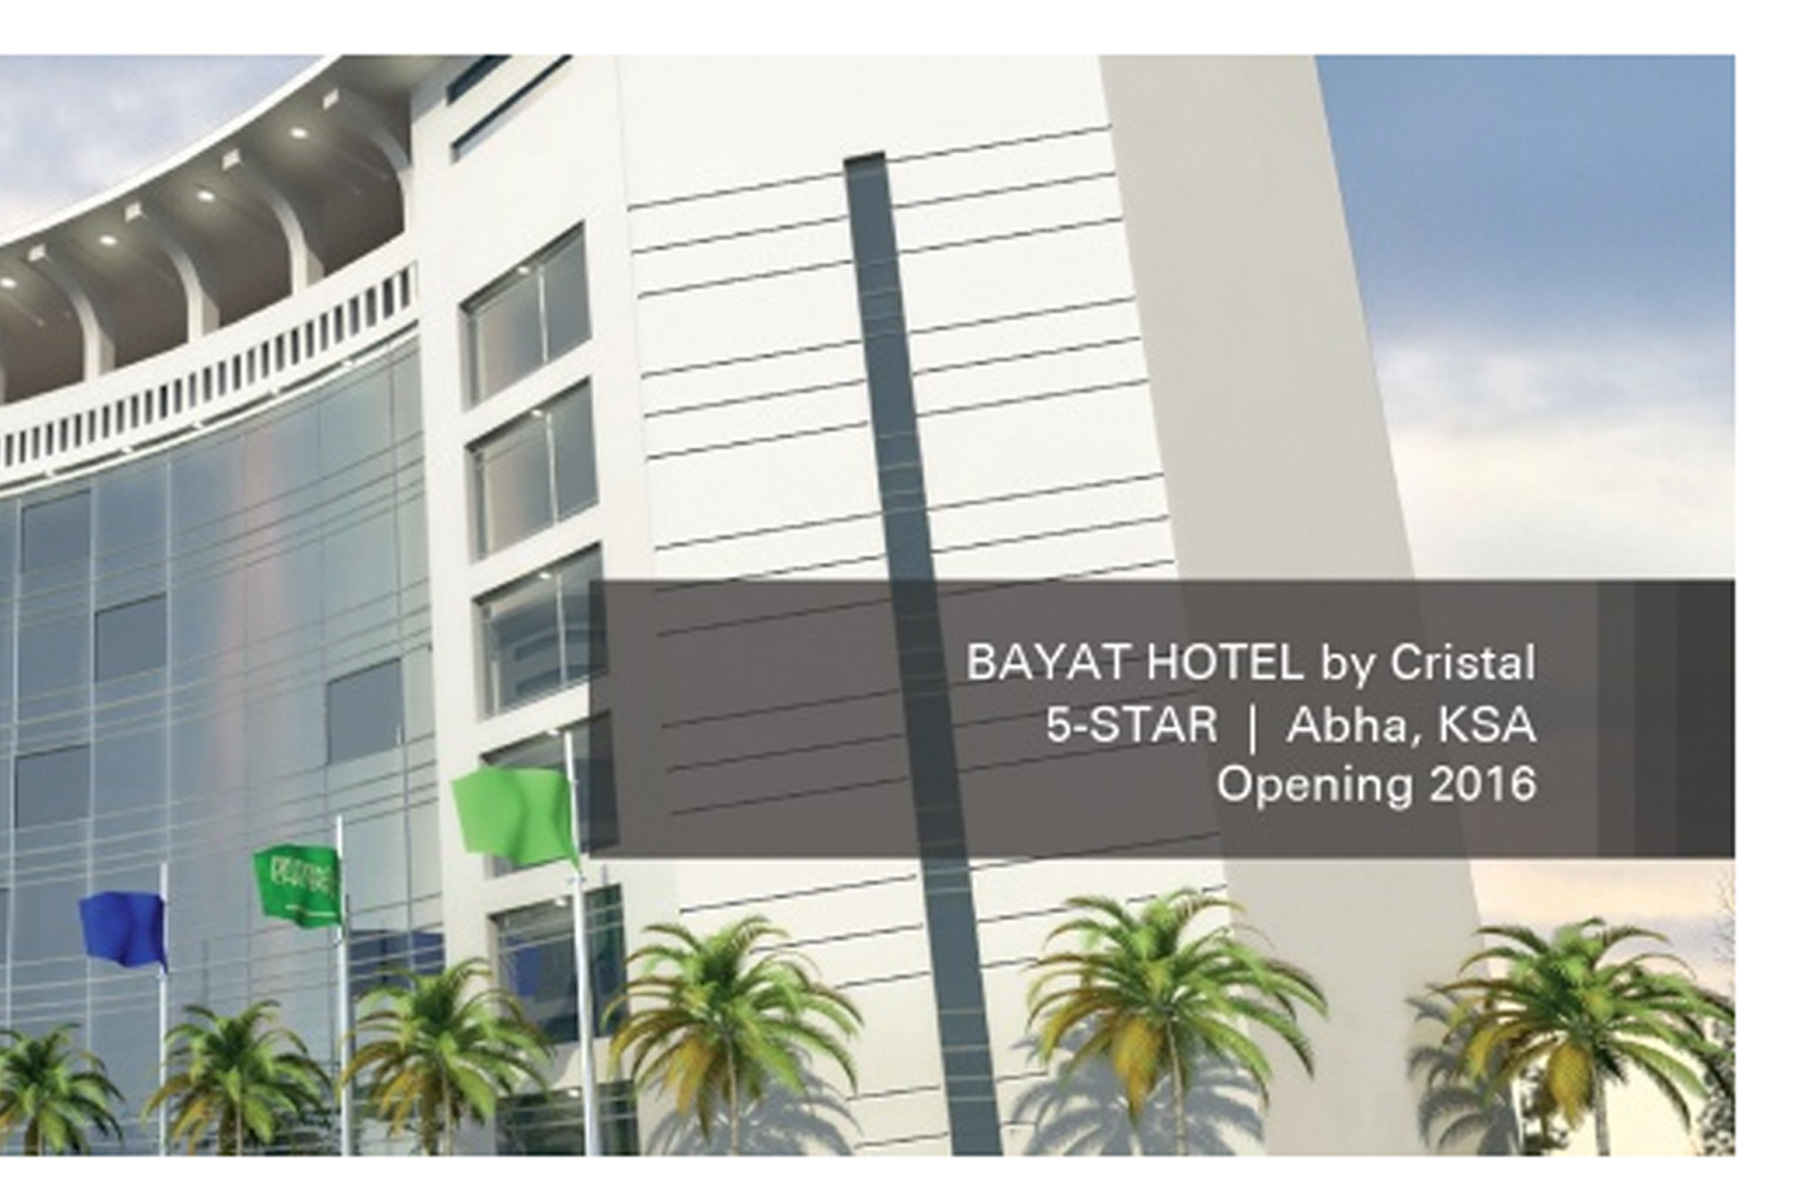 CRISTAL LAUNCHES THE BAYAT HOTEL BY CRISTAL IN THE KINGDOM OF SAUDI ARABIA